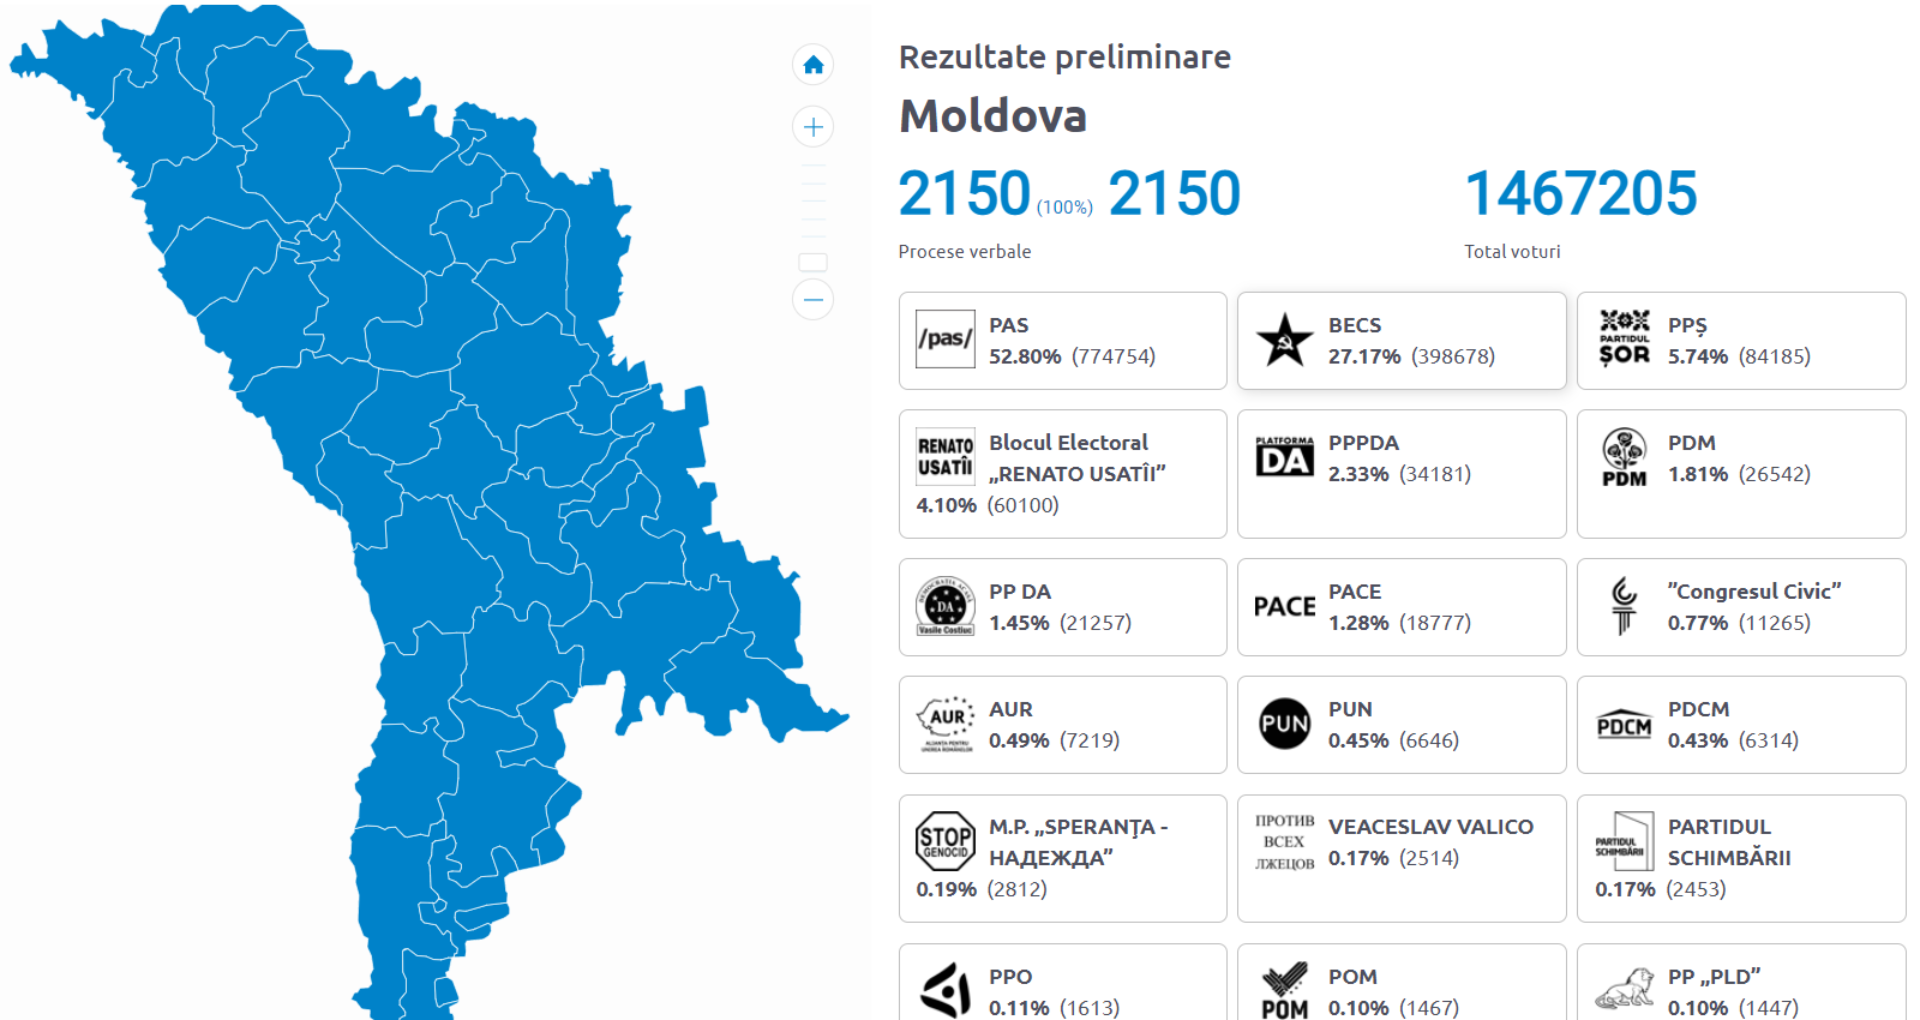 Moldovans Secure Parliamentary Majority for the pro-European PAS